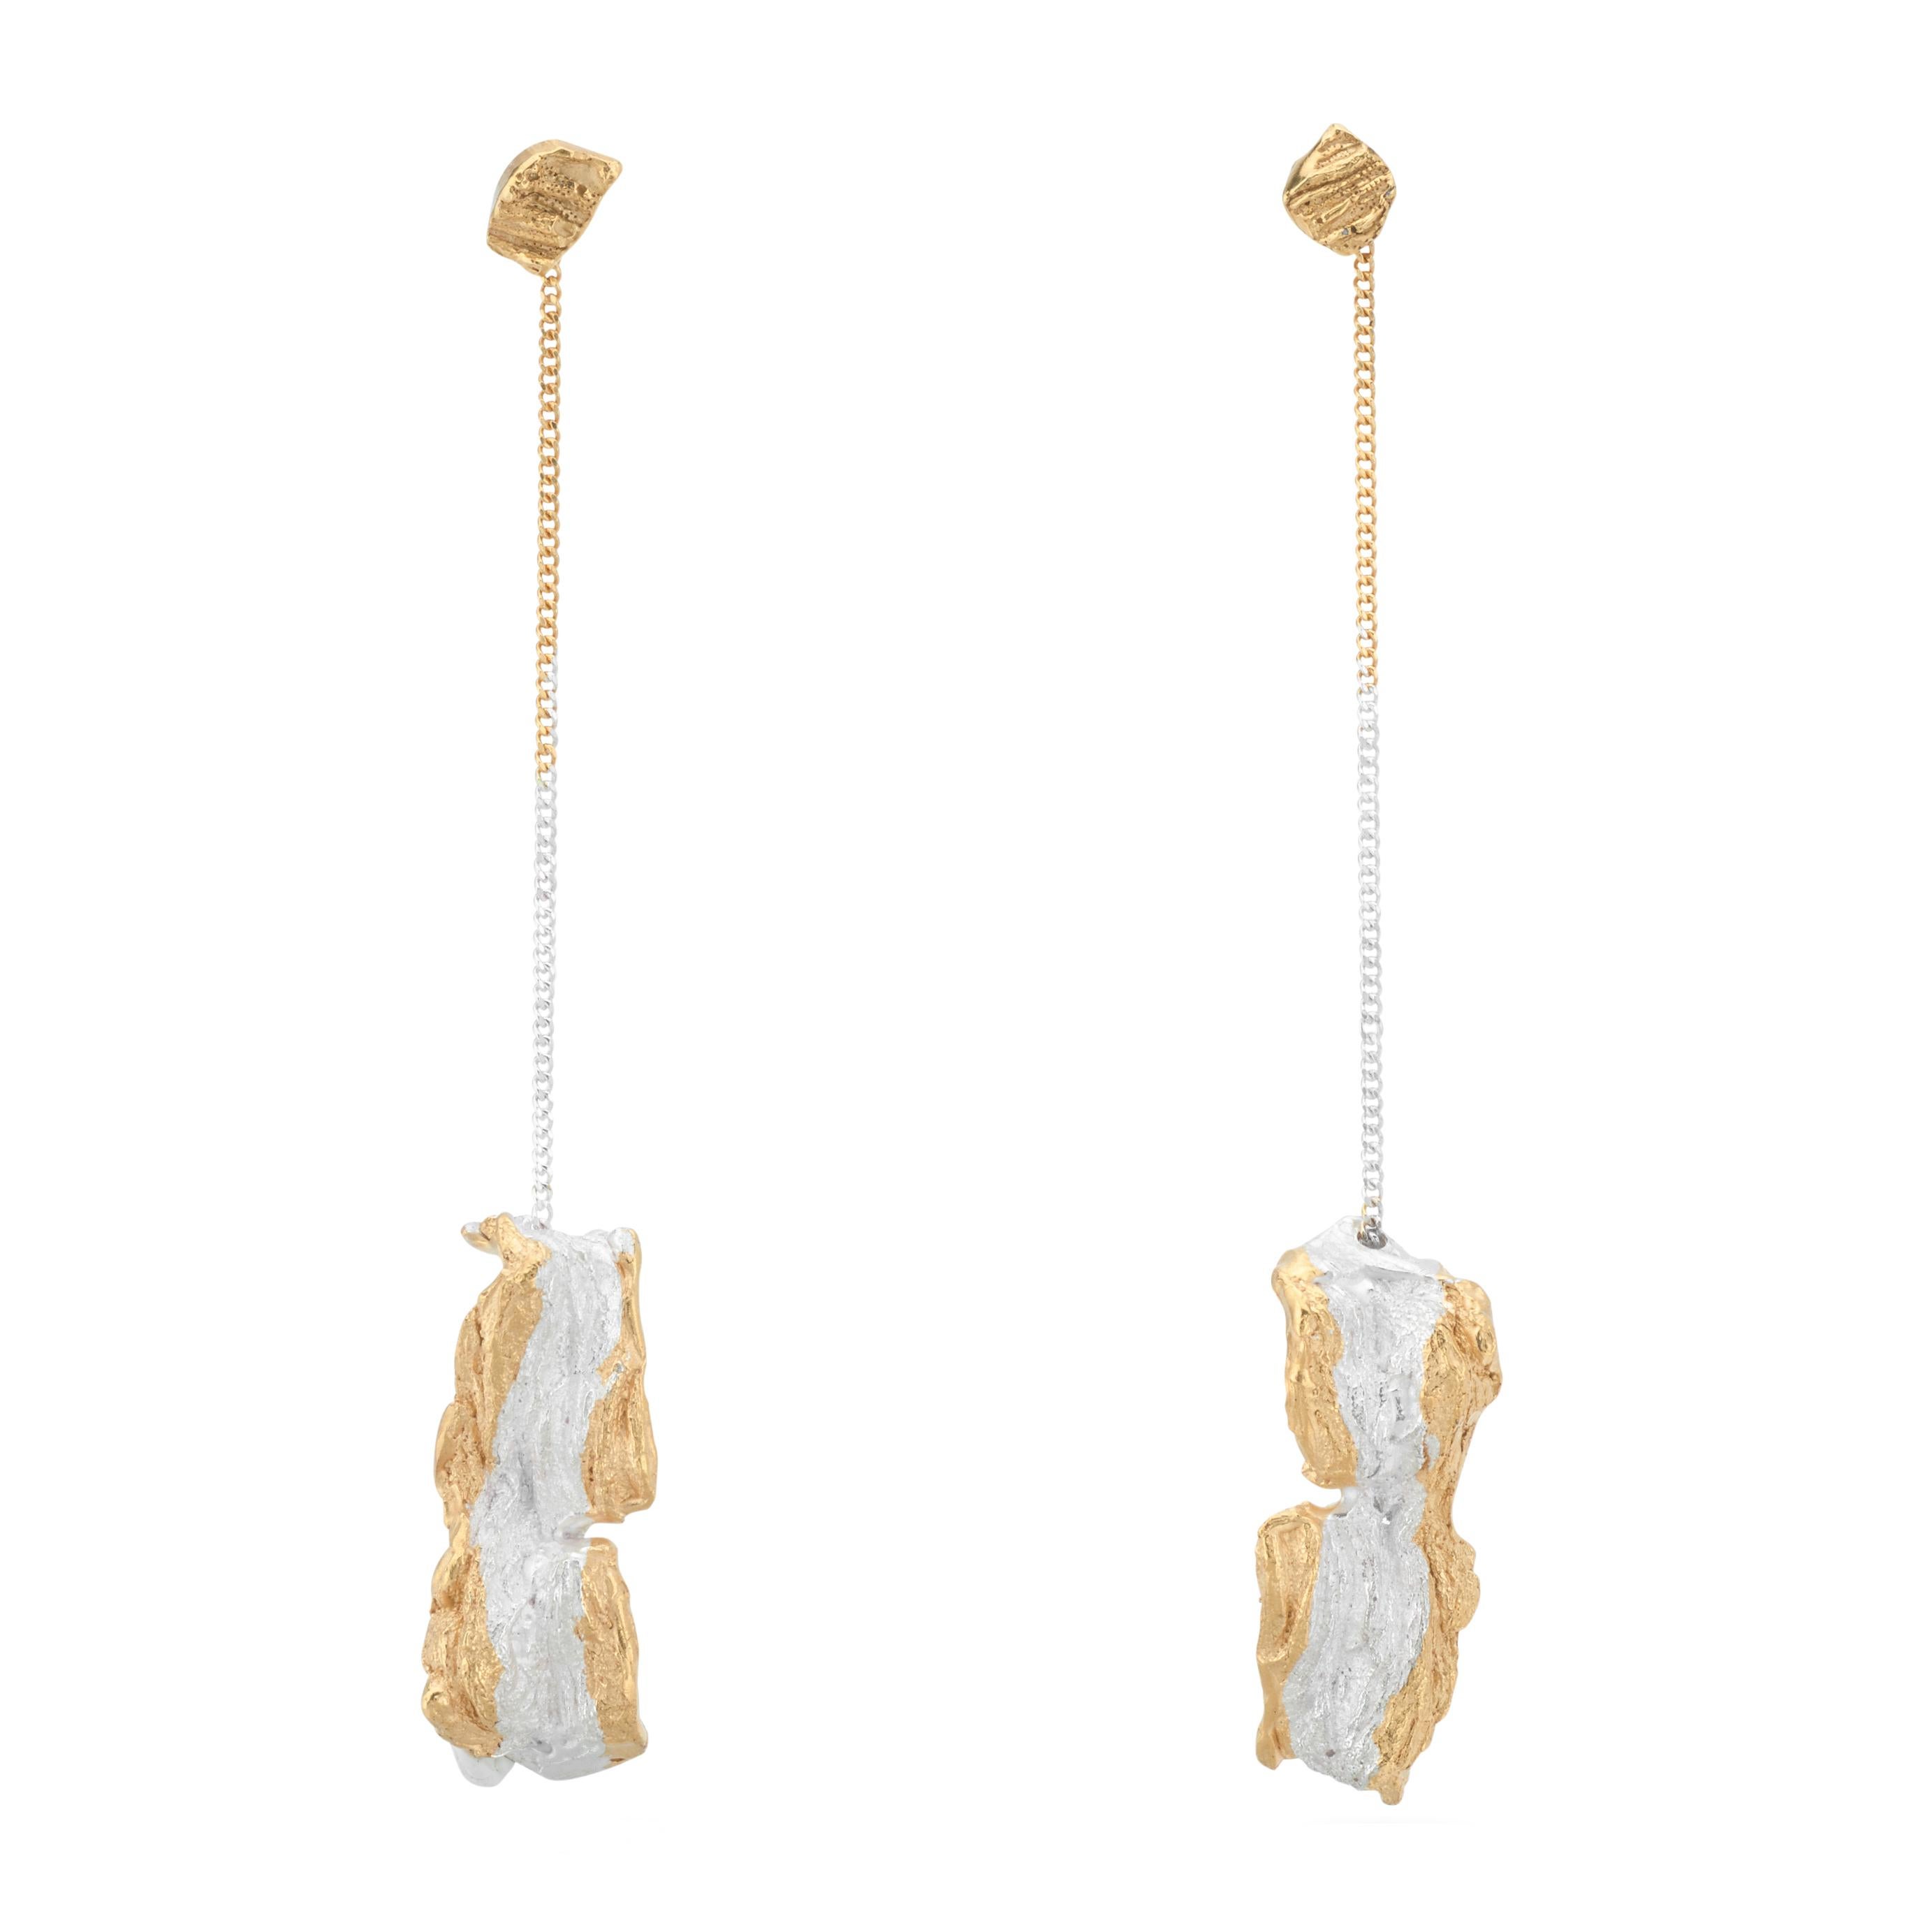 Loveness Lee - Cascade - Gold and Silver Dangle Drop Textured Earrings For Sale